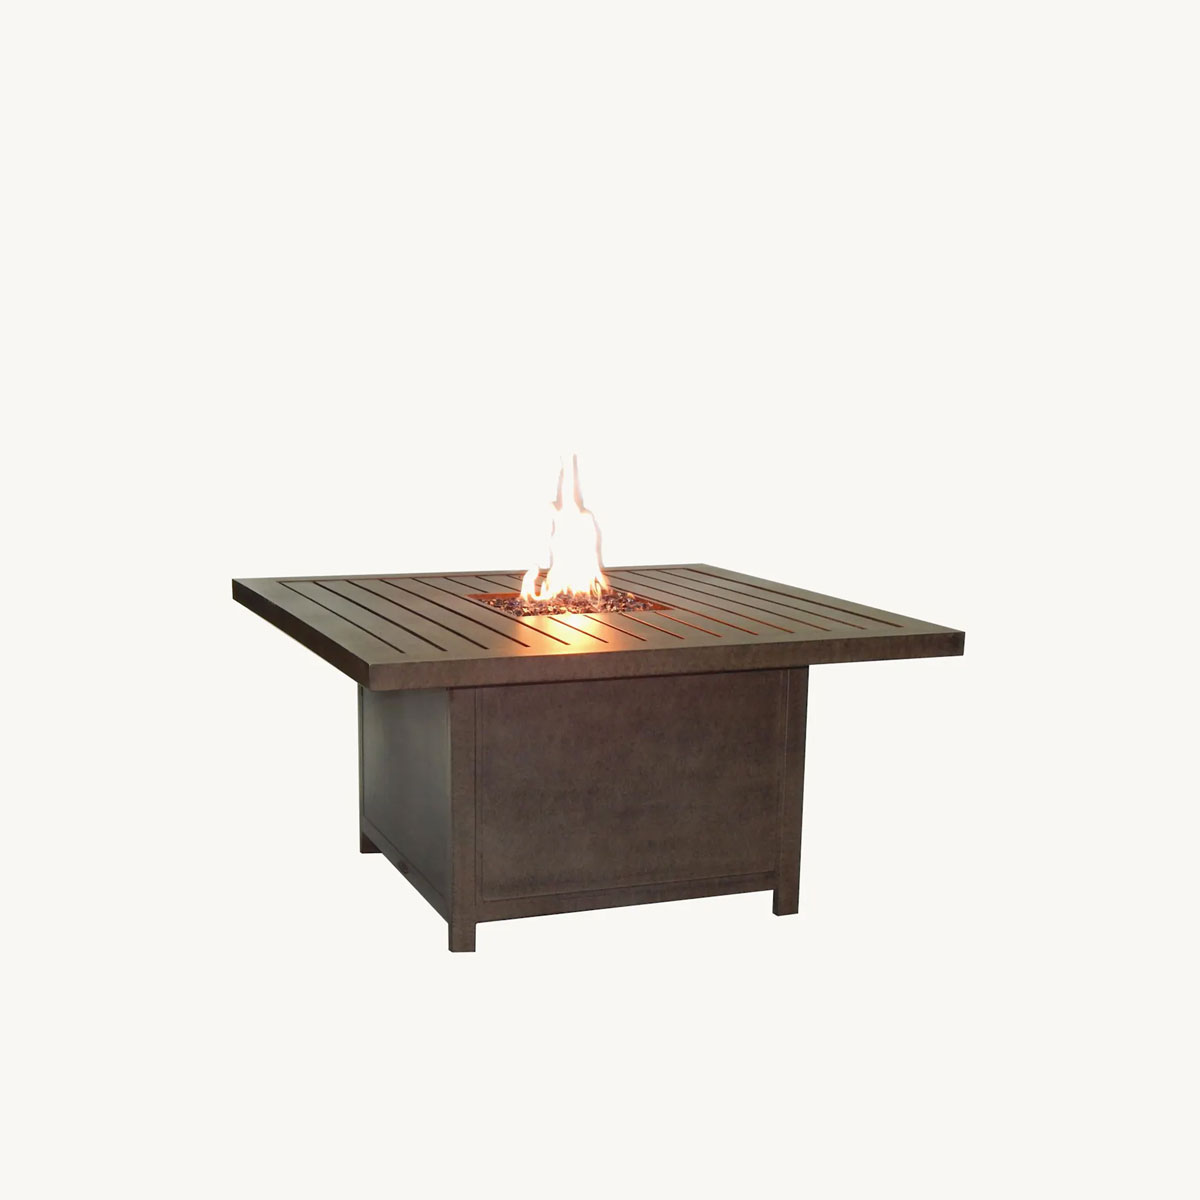 Castelle Moderna 44 inch Square Coffee Table with Firepit